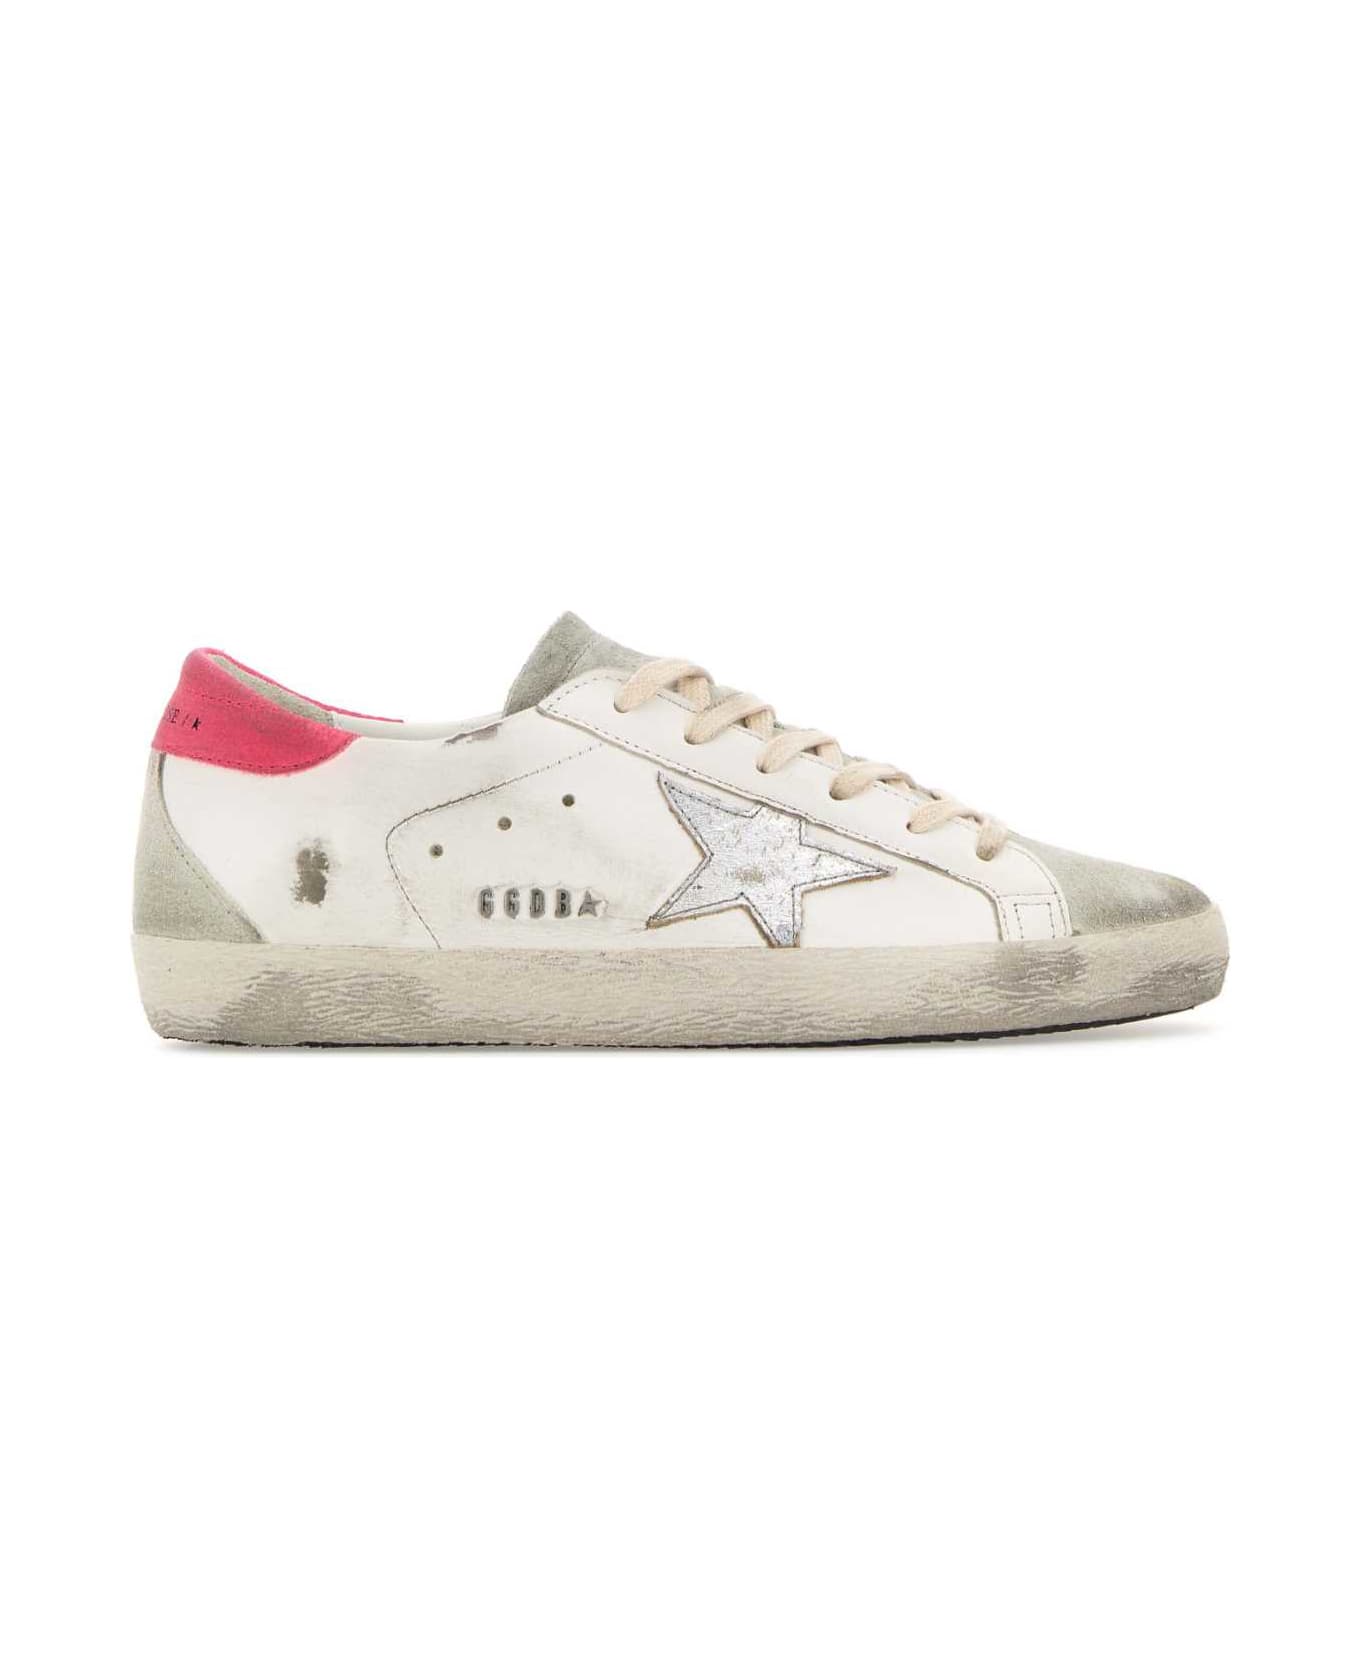 Golden Goose Multicolor Leather Superstar Sneakers - WHITEICESILVERLOBSTERFLUO